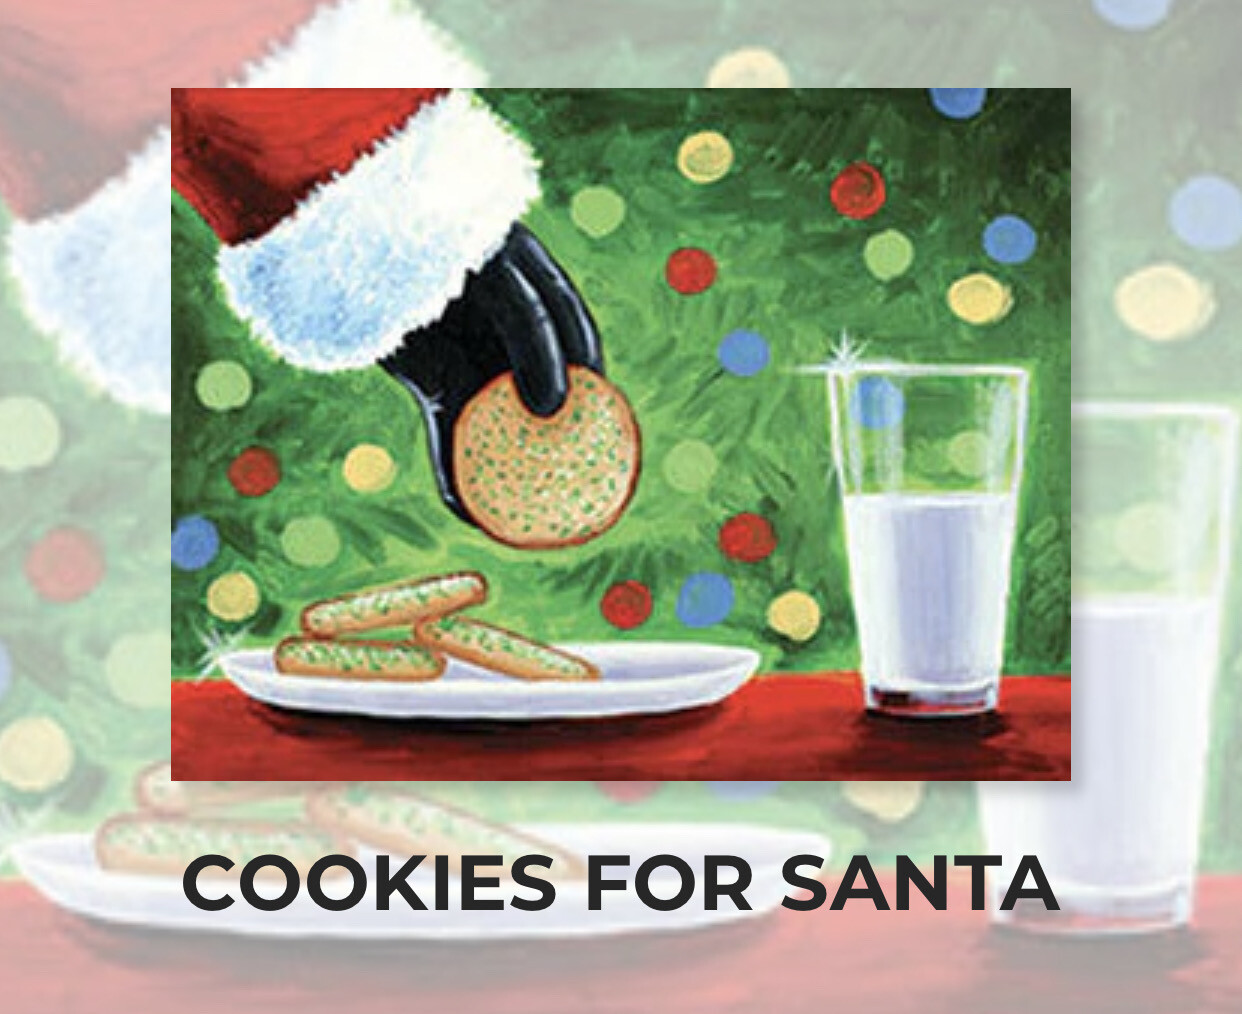 Cookies For Santa ADULT Acrylic Paint On Canvas DIY Art Kit - 3 Week Special Order